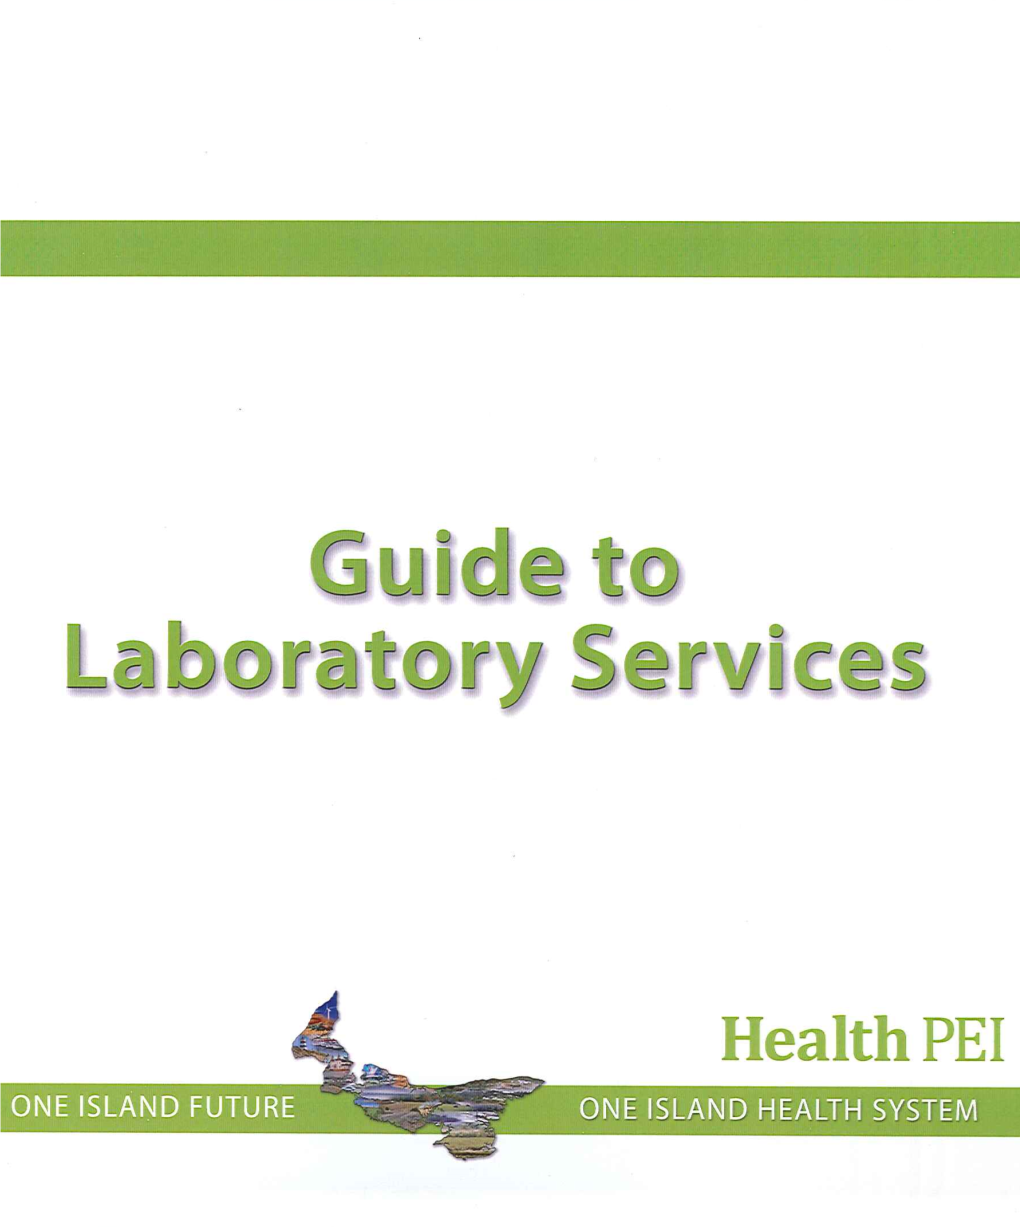 Guide to Laboratory Services